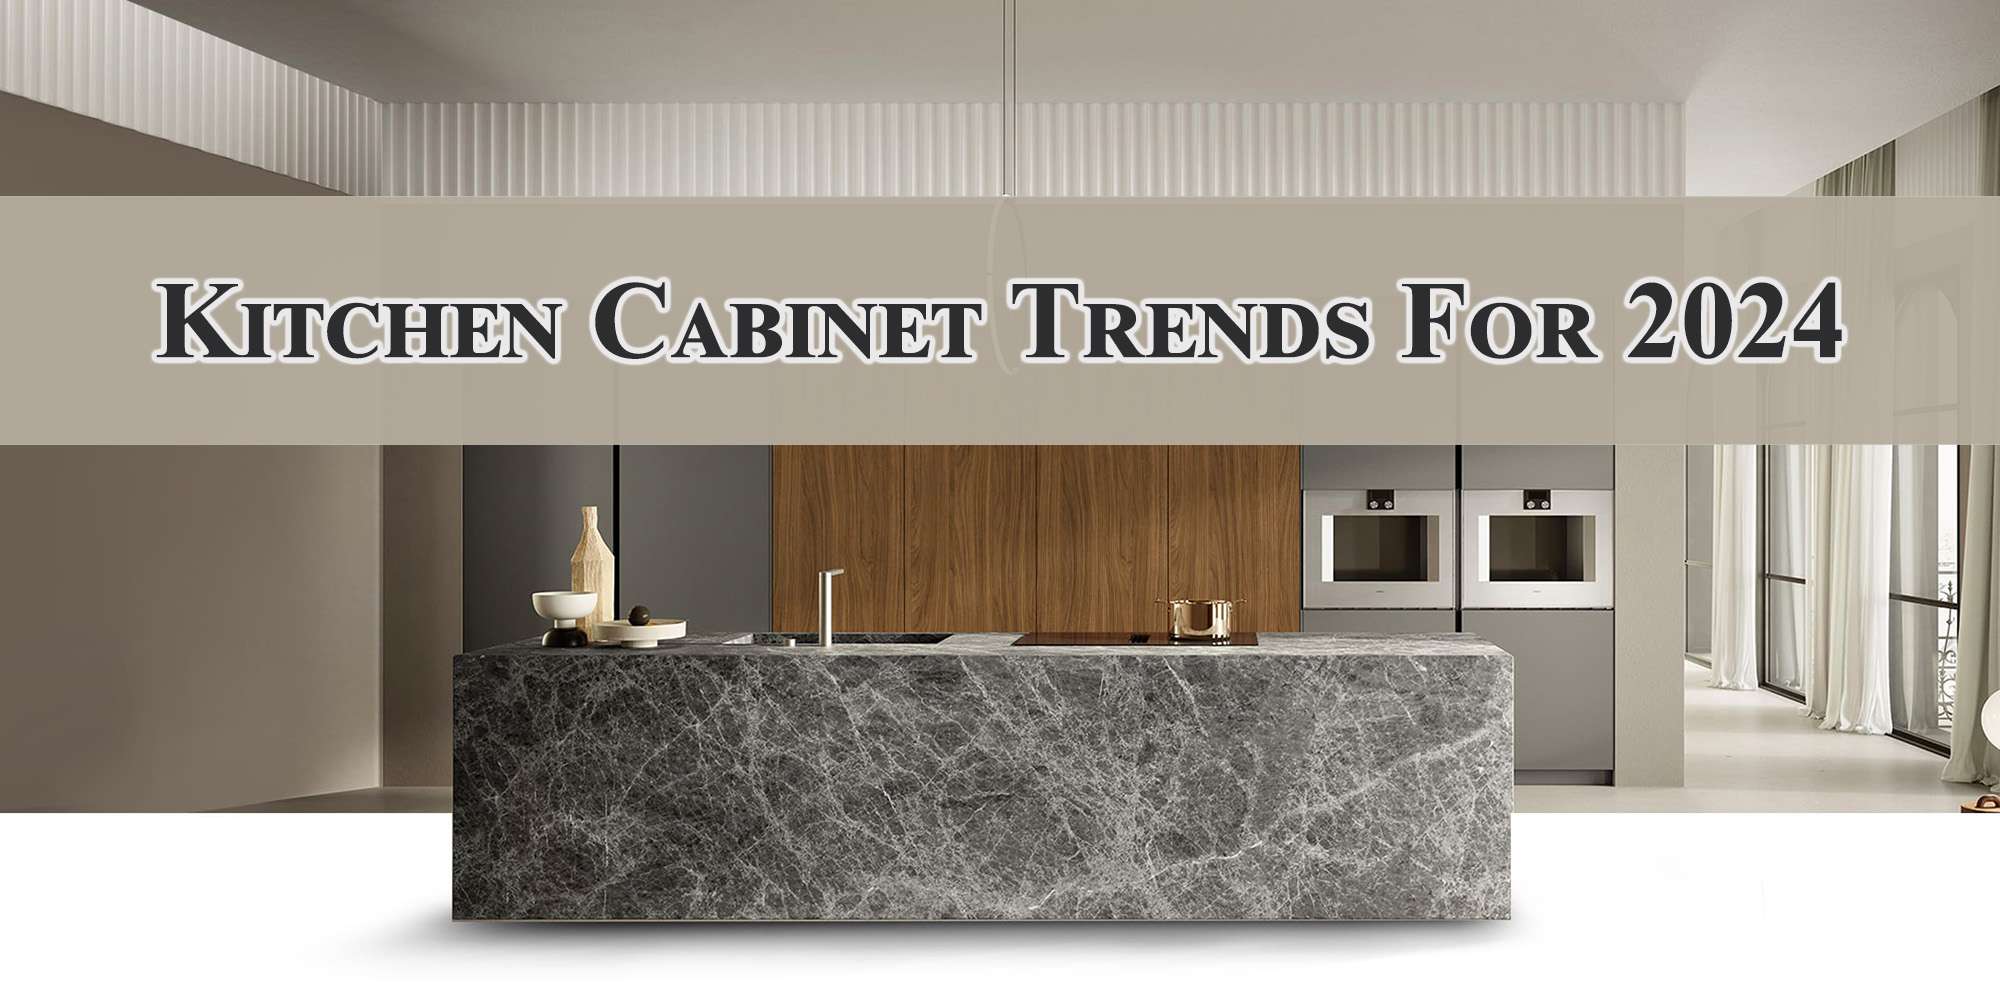 Kitchen Cabinet Trends For 2024 